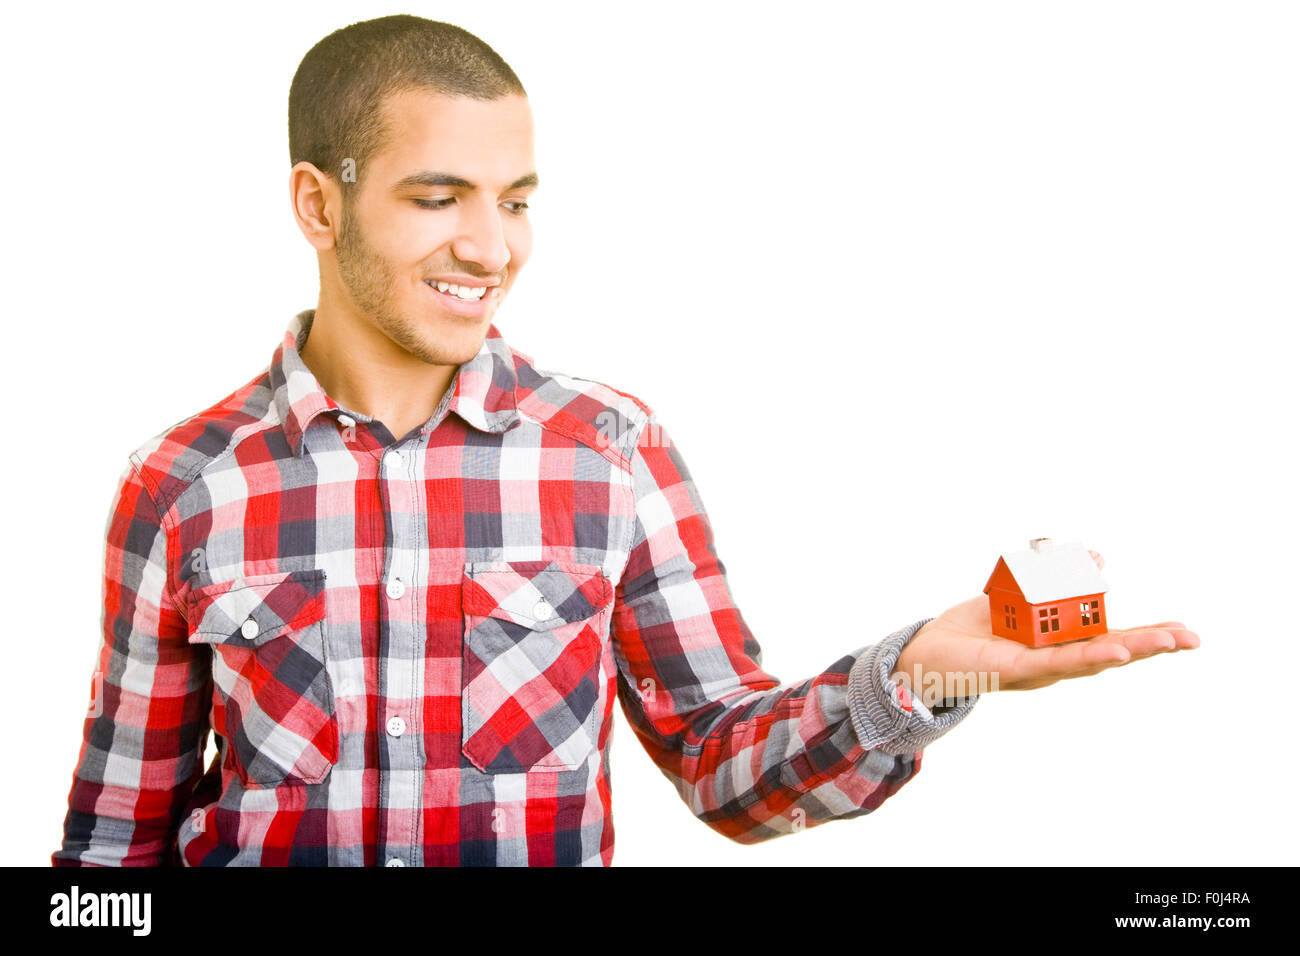 Young happy man holding a small miniature house Banque D'Images